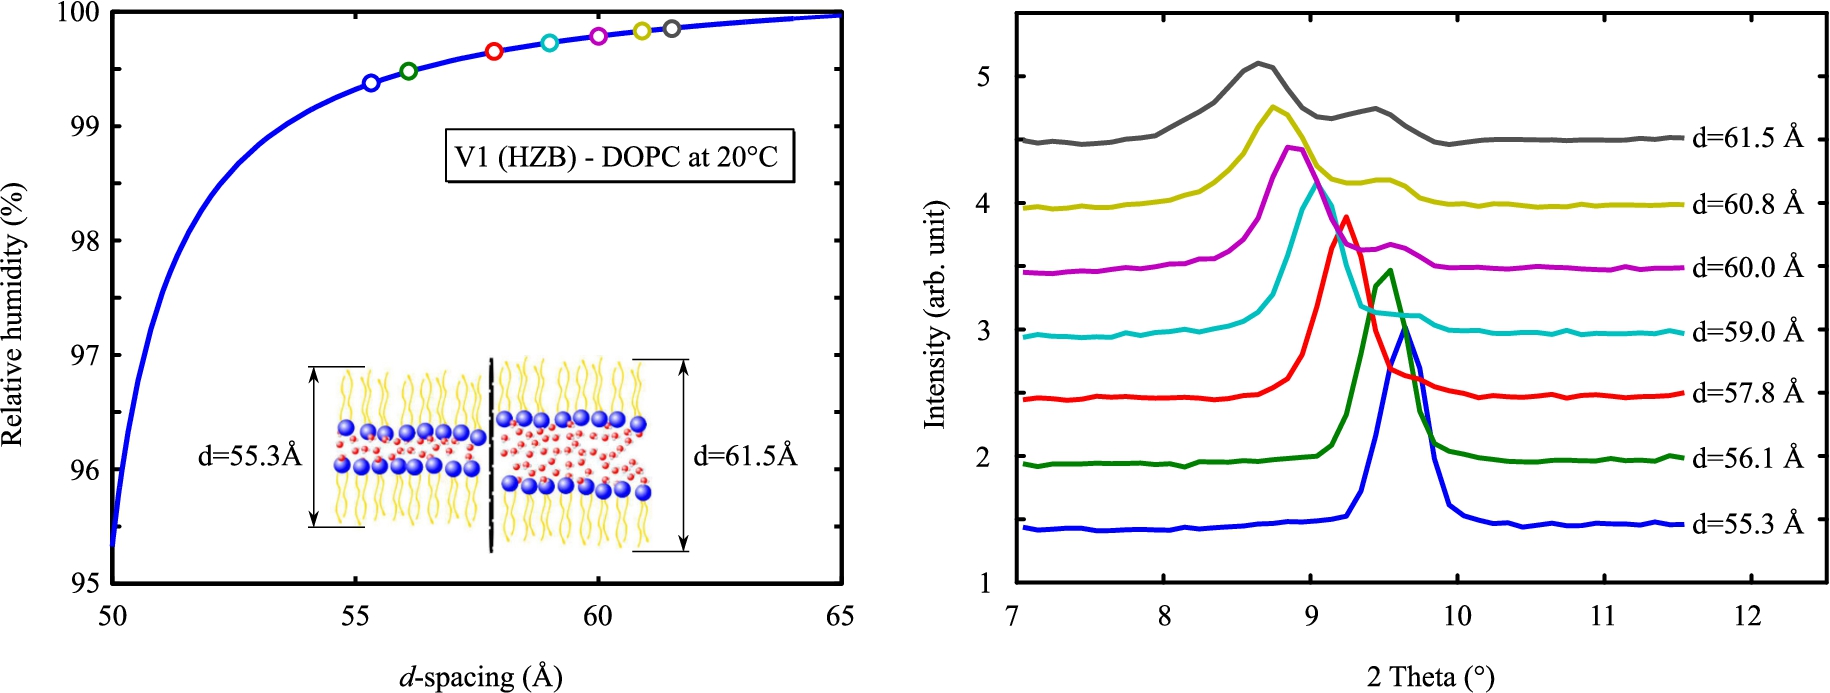 Bragg reflections from a DOPC lipid bilayer at 20°C (right). Calculated d-spacings of each measurement are shown on the left up to 99.9% RH. Above a d-spacing of 59 Å splitting occurs, which may indicate two domains in the sample.